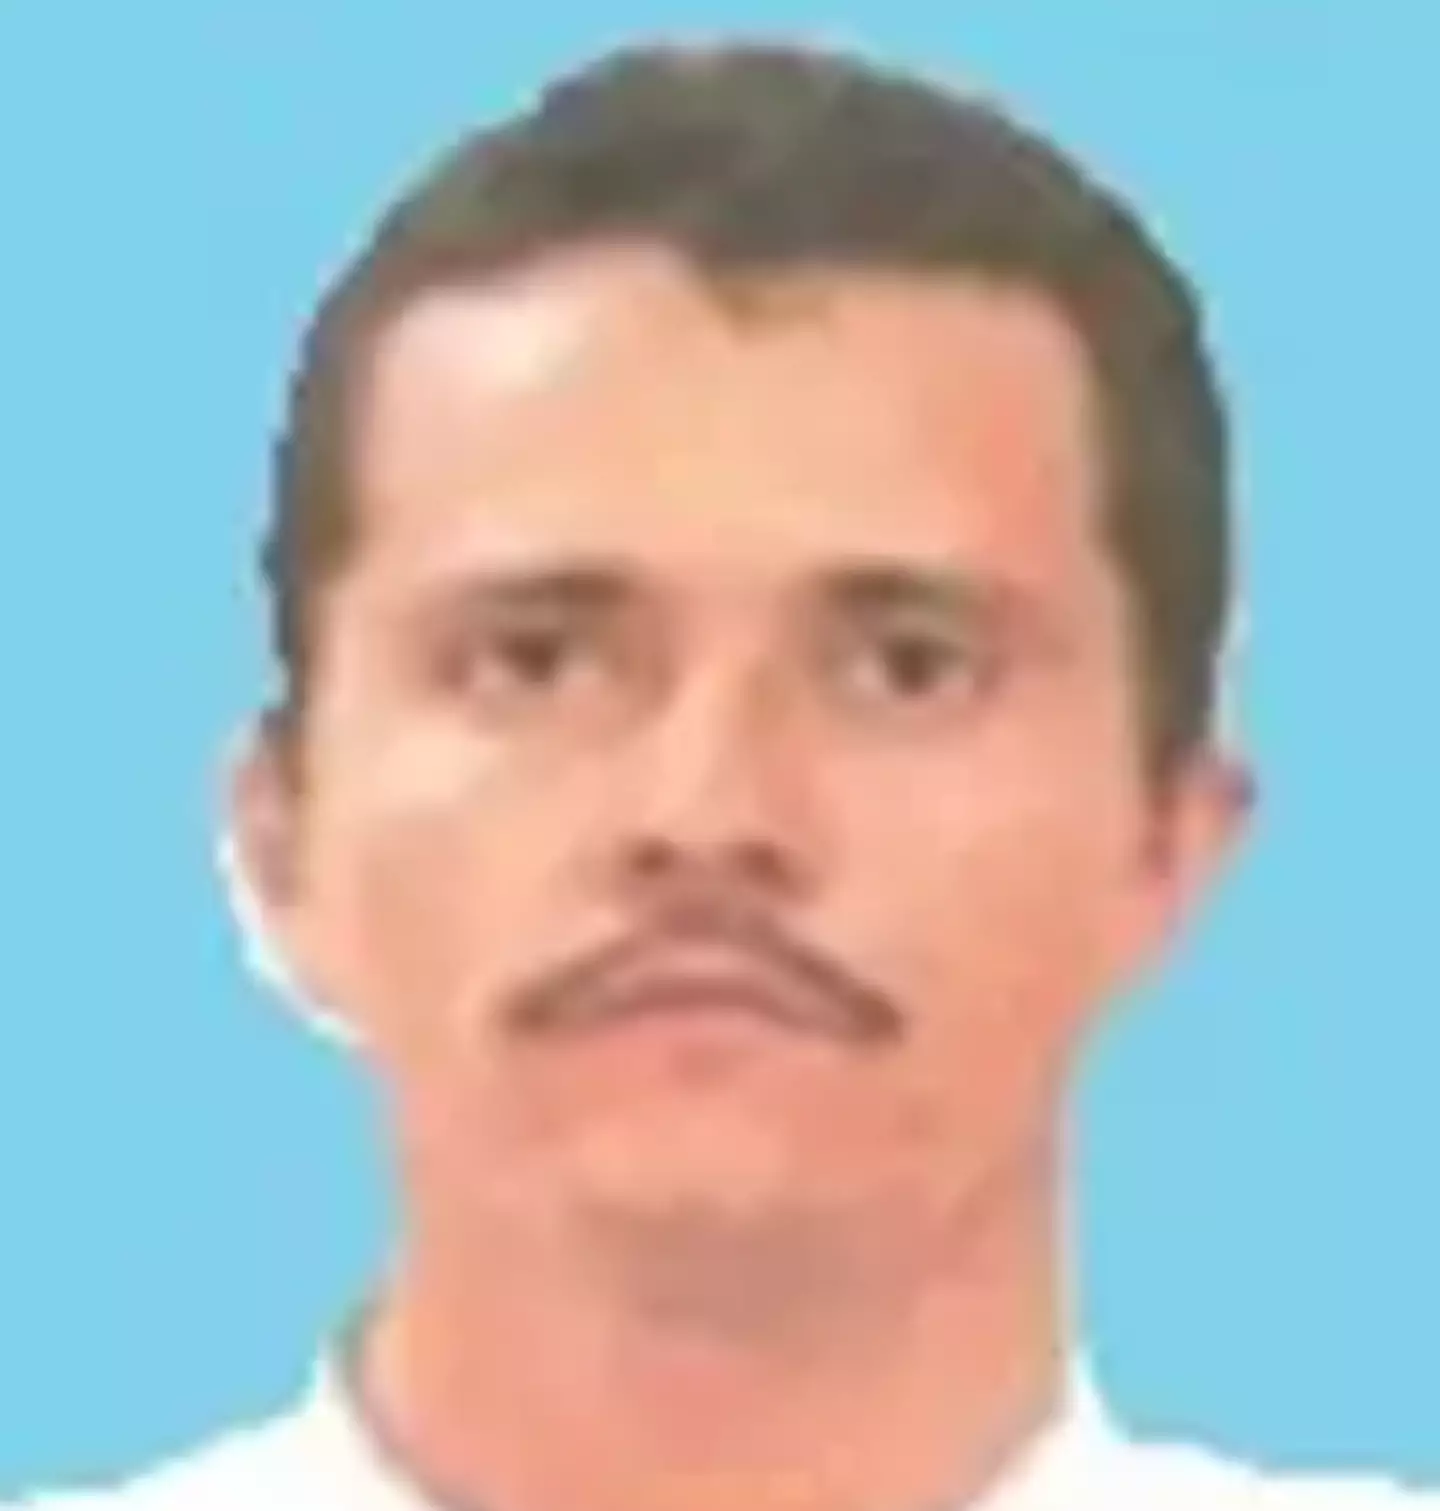 El Mencho is wanted by the US and Mexican governments.